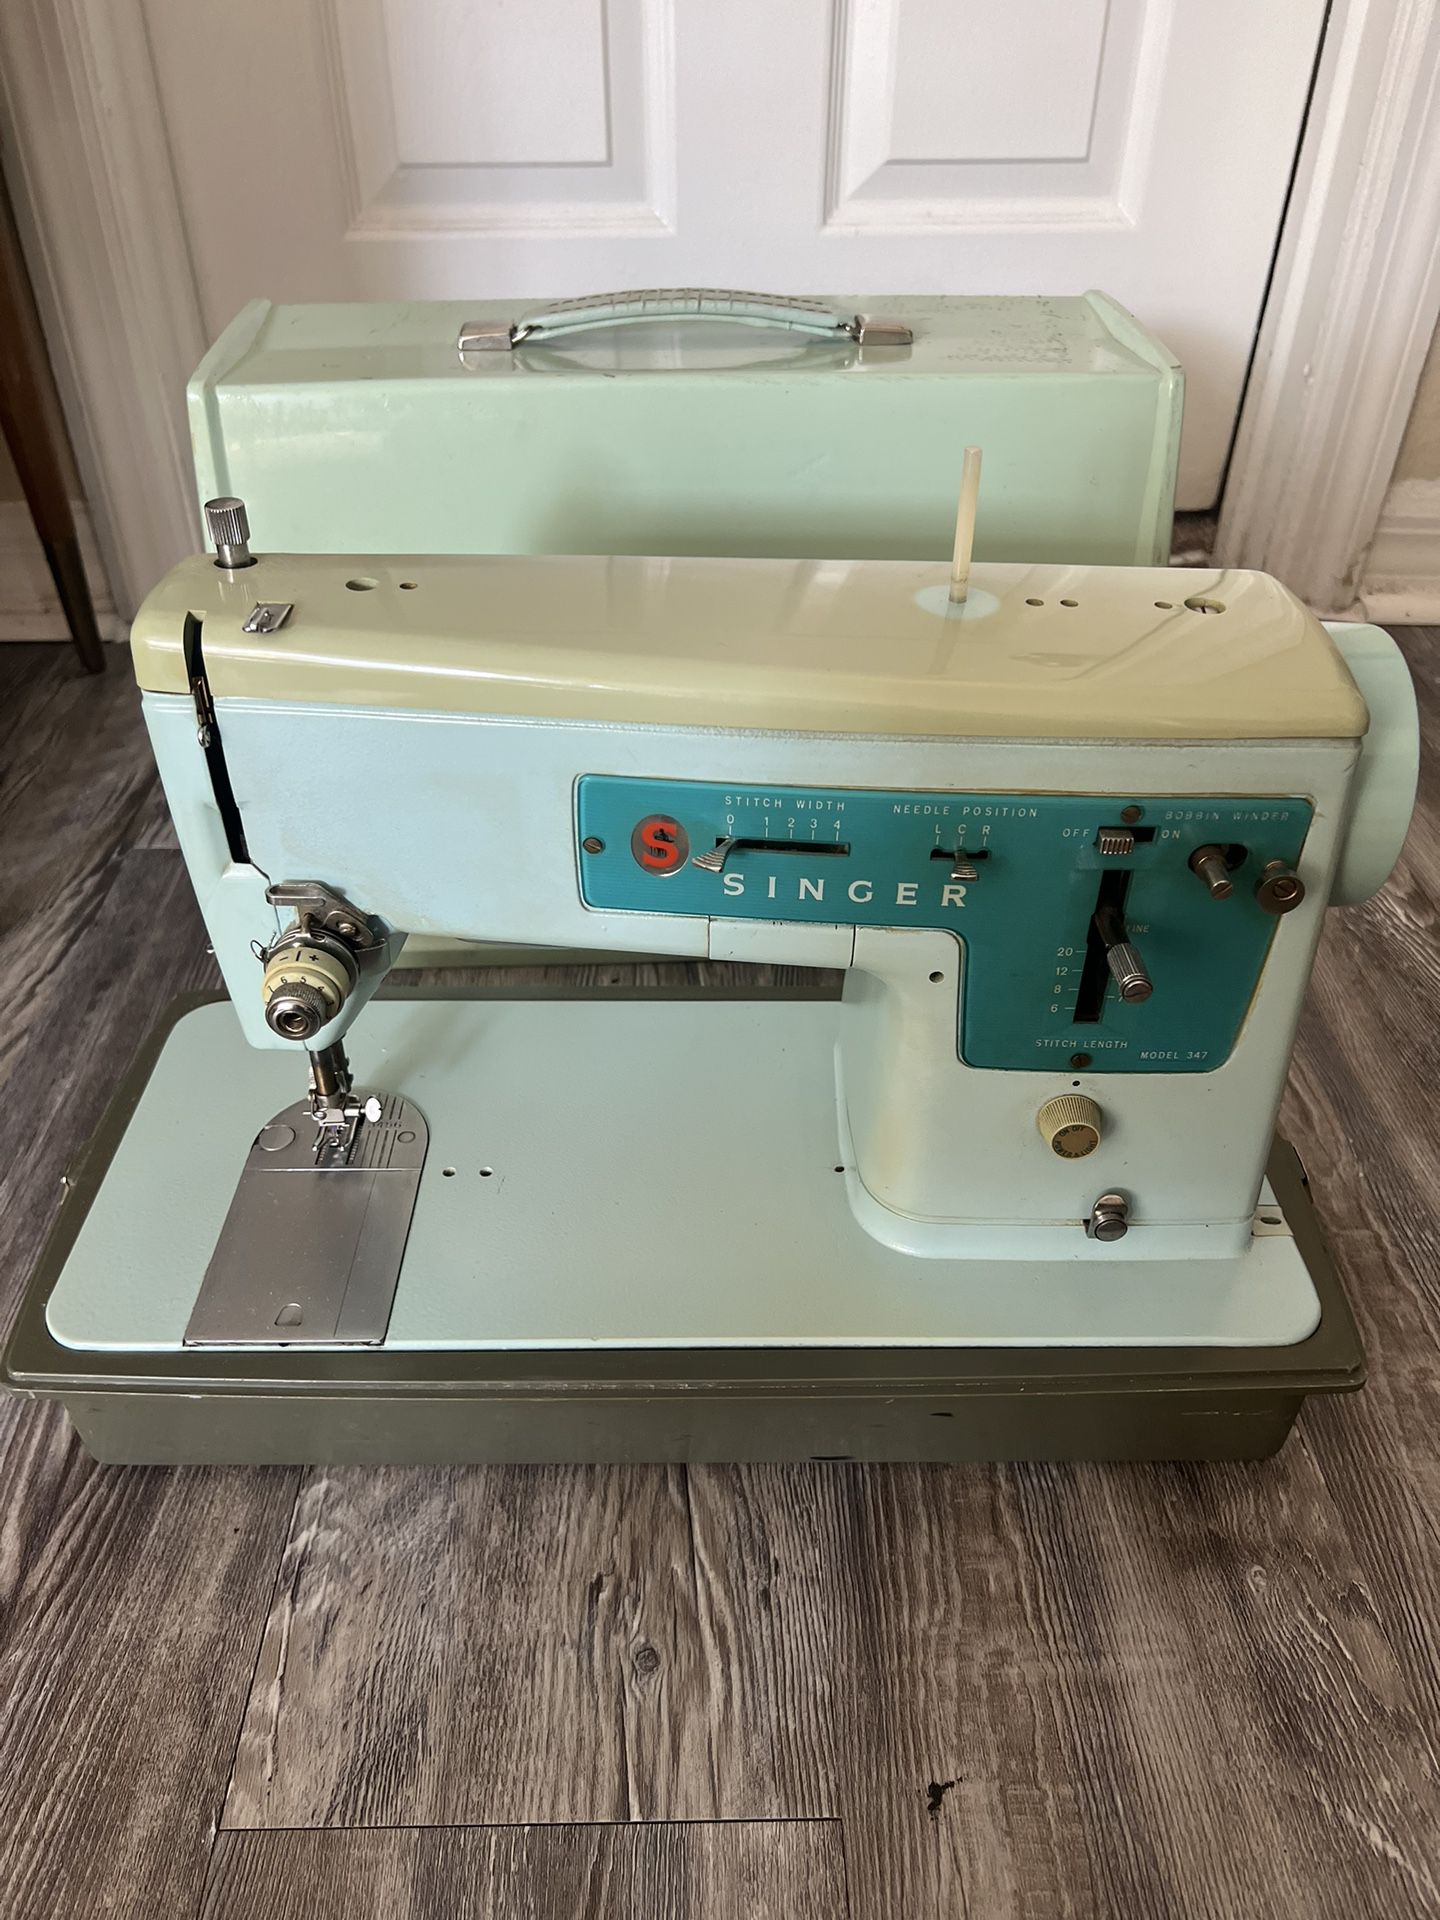 Vintage Singer Sewing Machine Model 347. Does not have a cord or pedal.